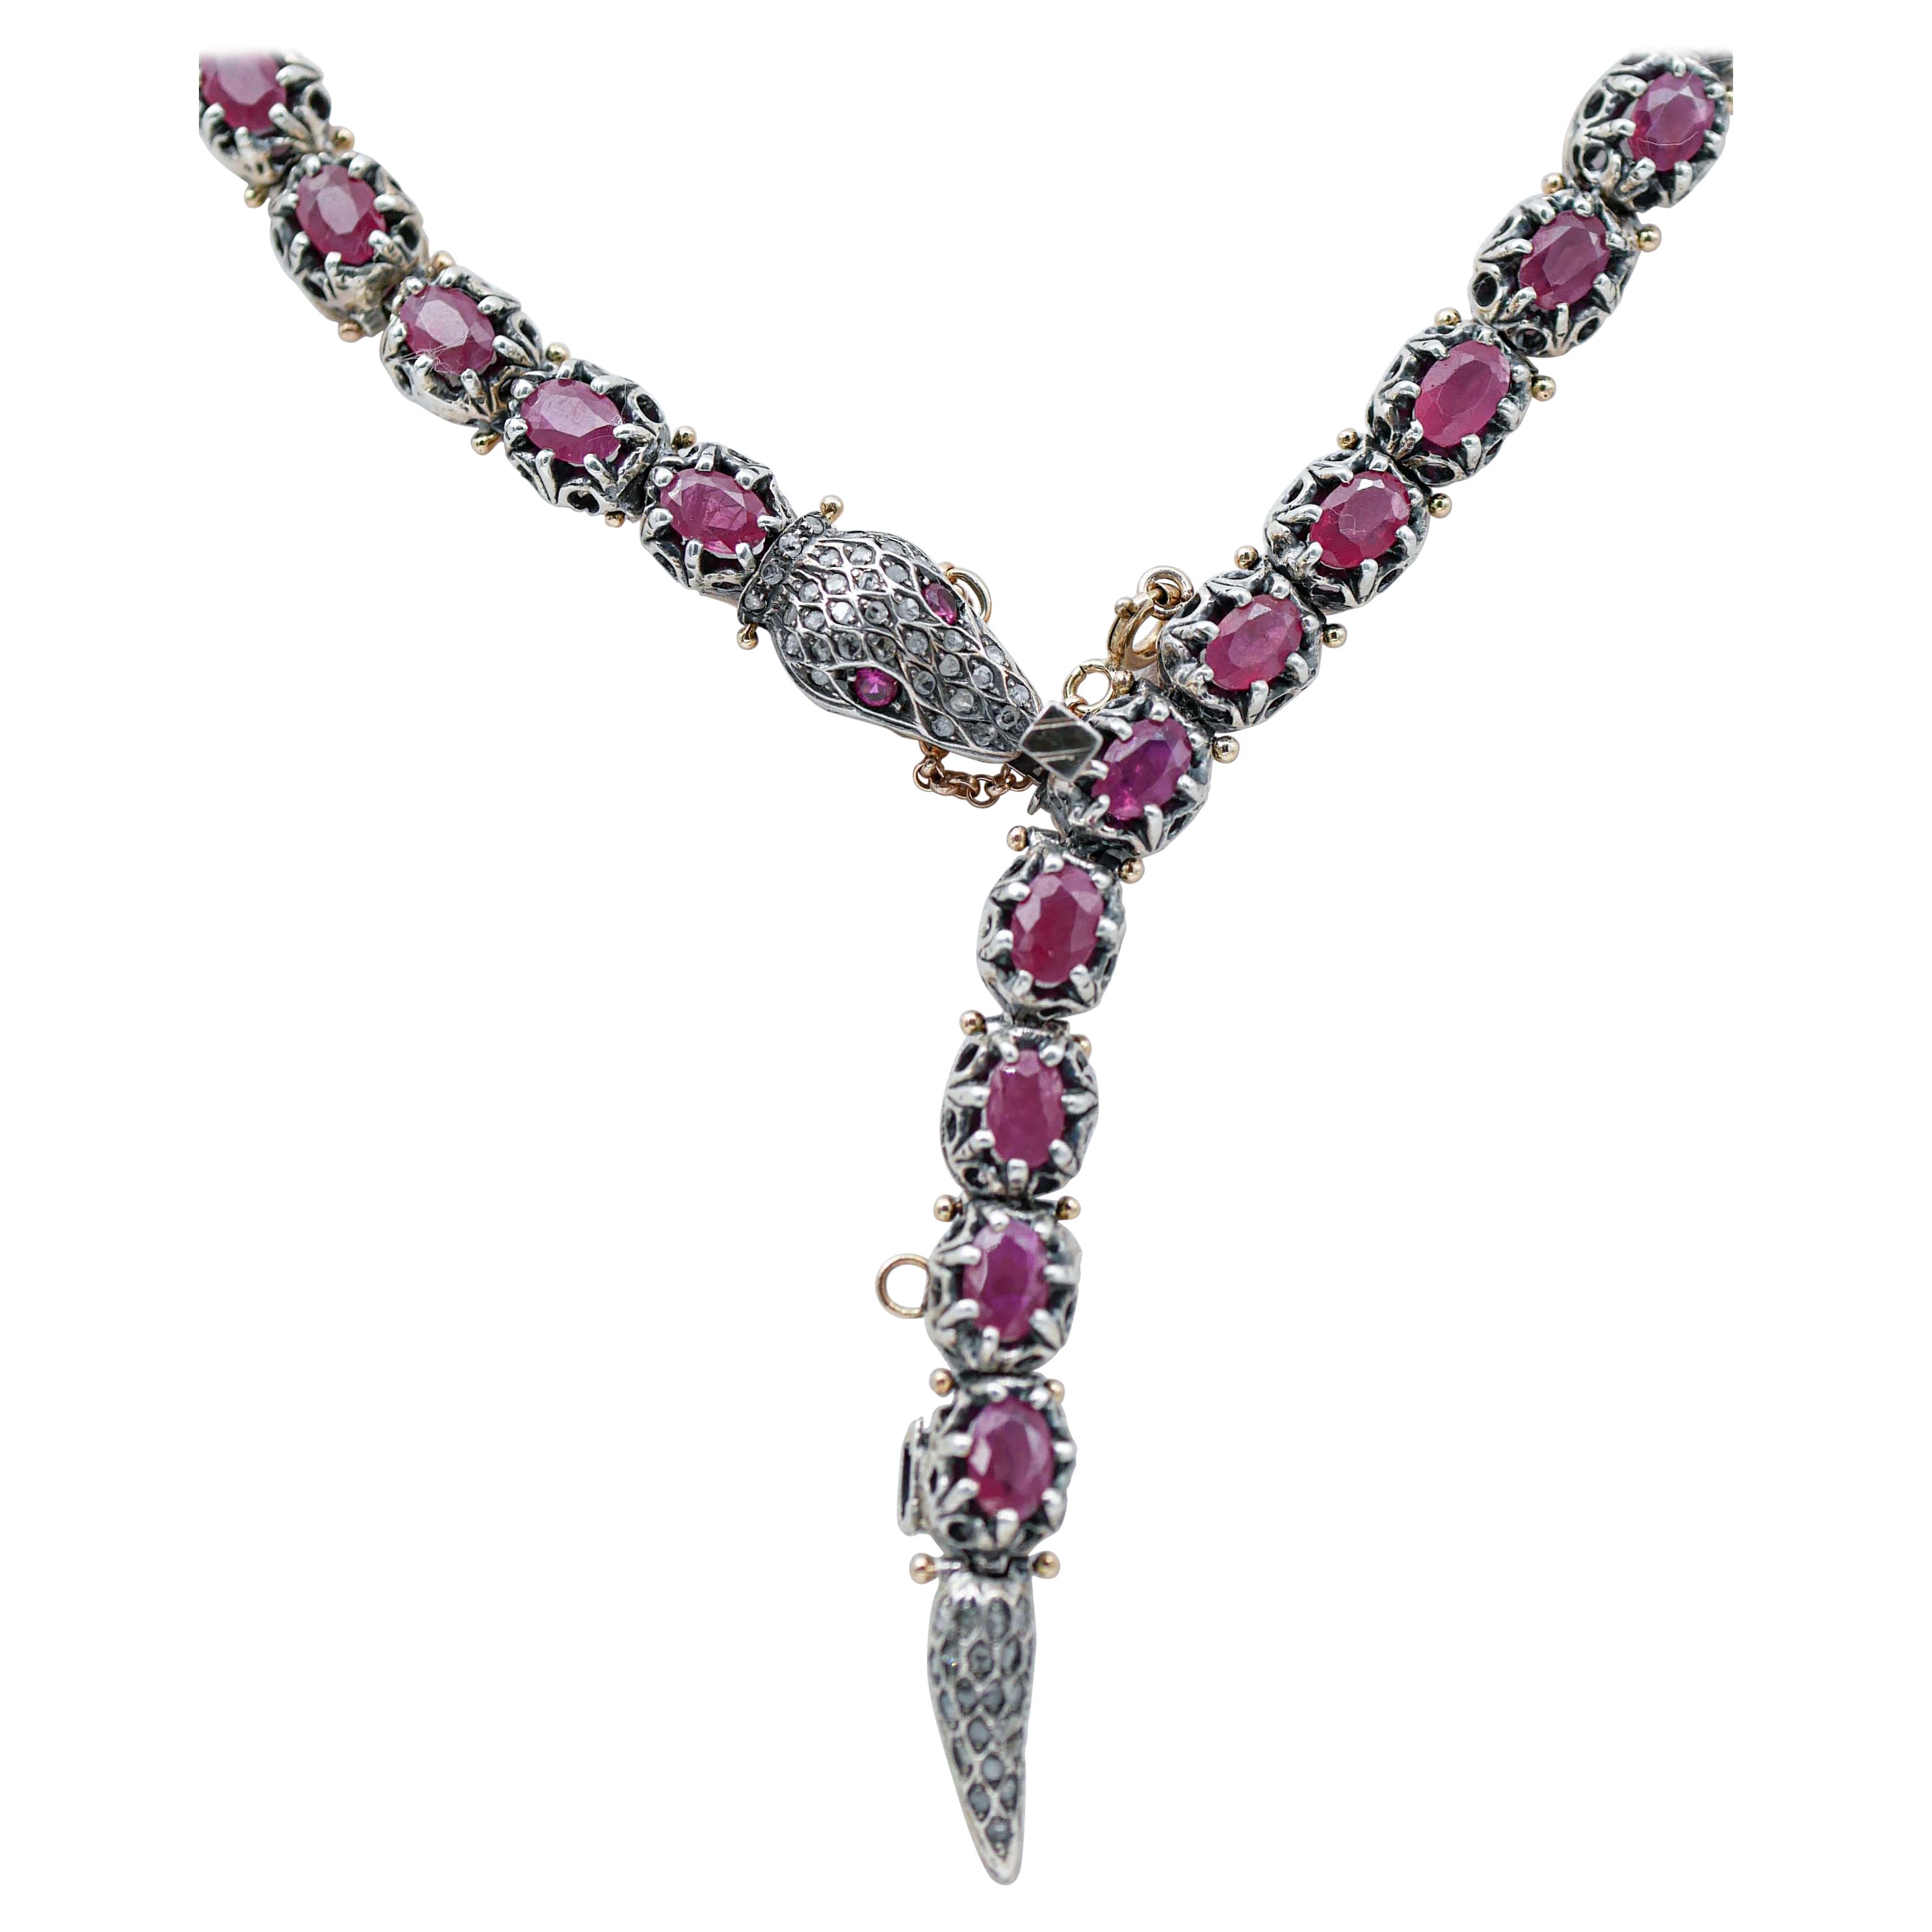 Rubies, Diamonds, Stones, Rose Gold and Silver Retro Snake Necklace